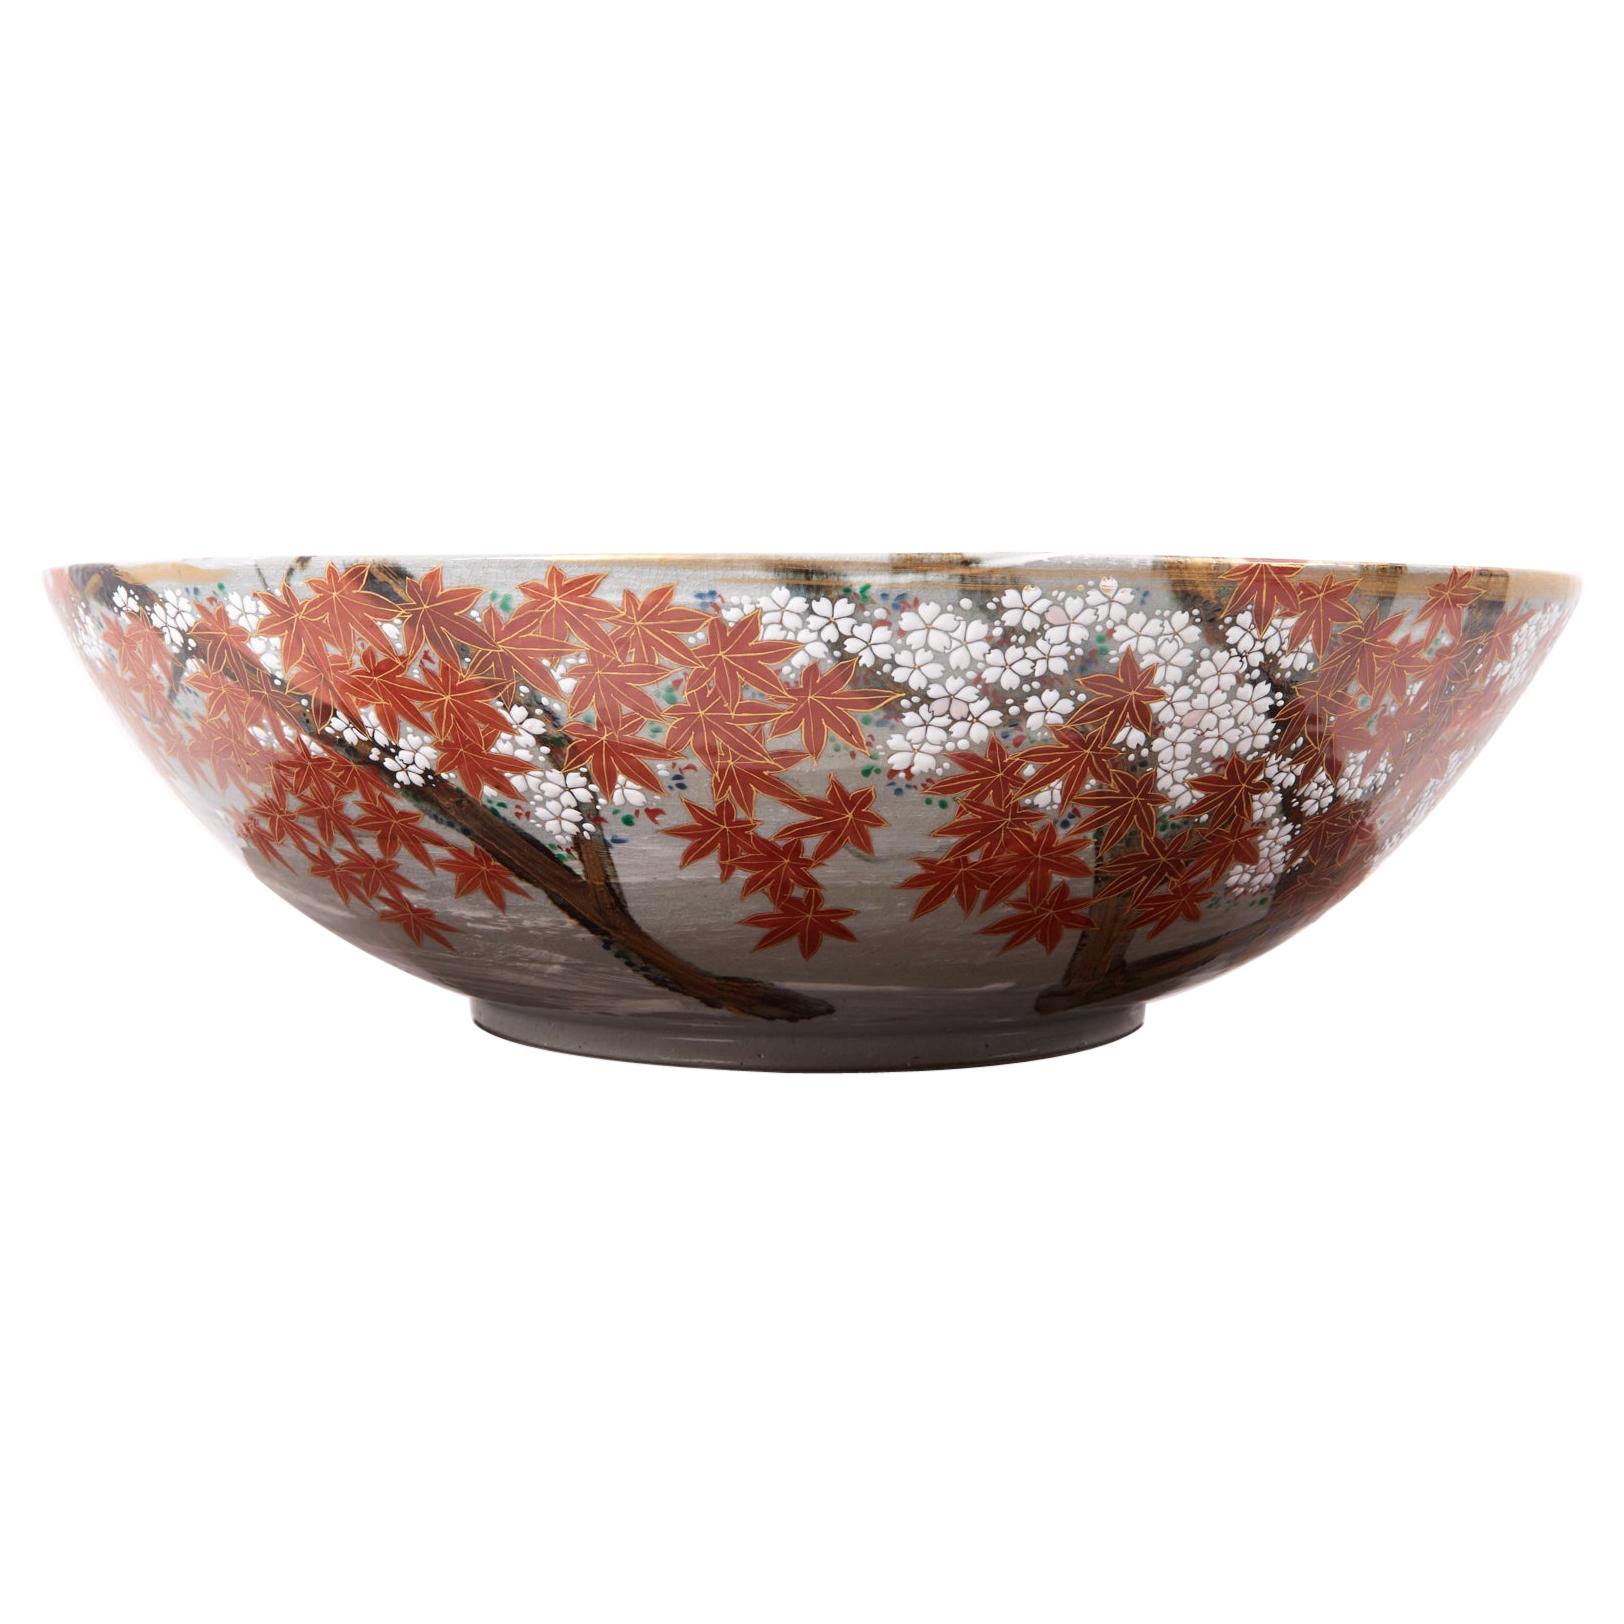 Japanese Hand Painted Ceramic Bowl, New For Sale